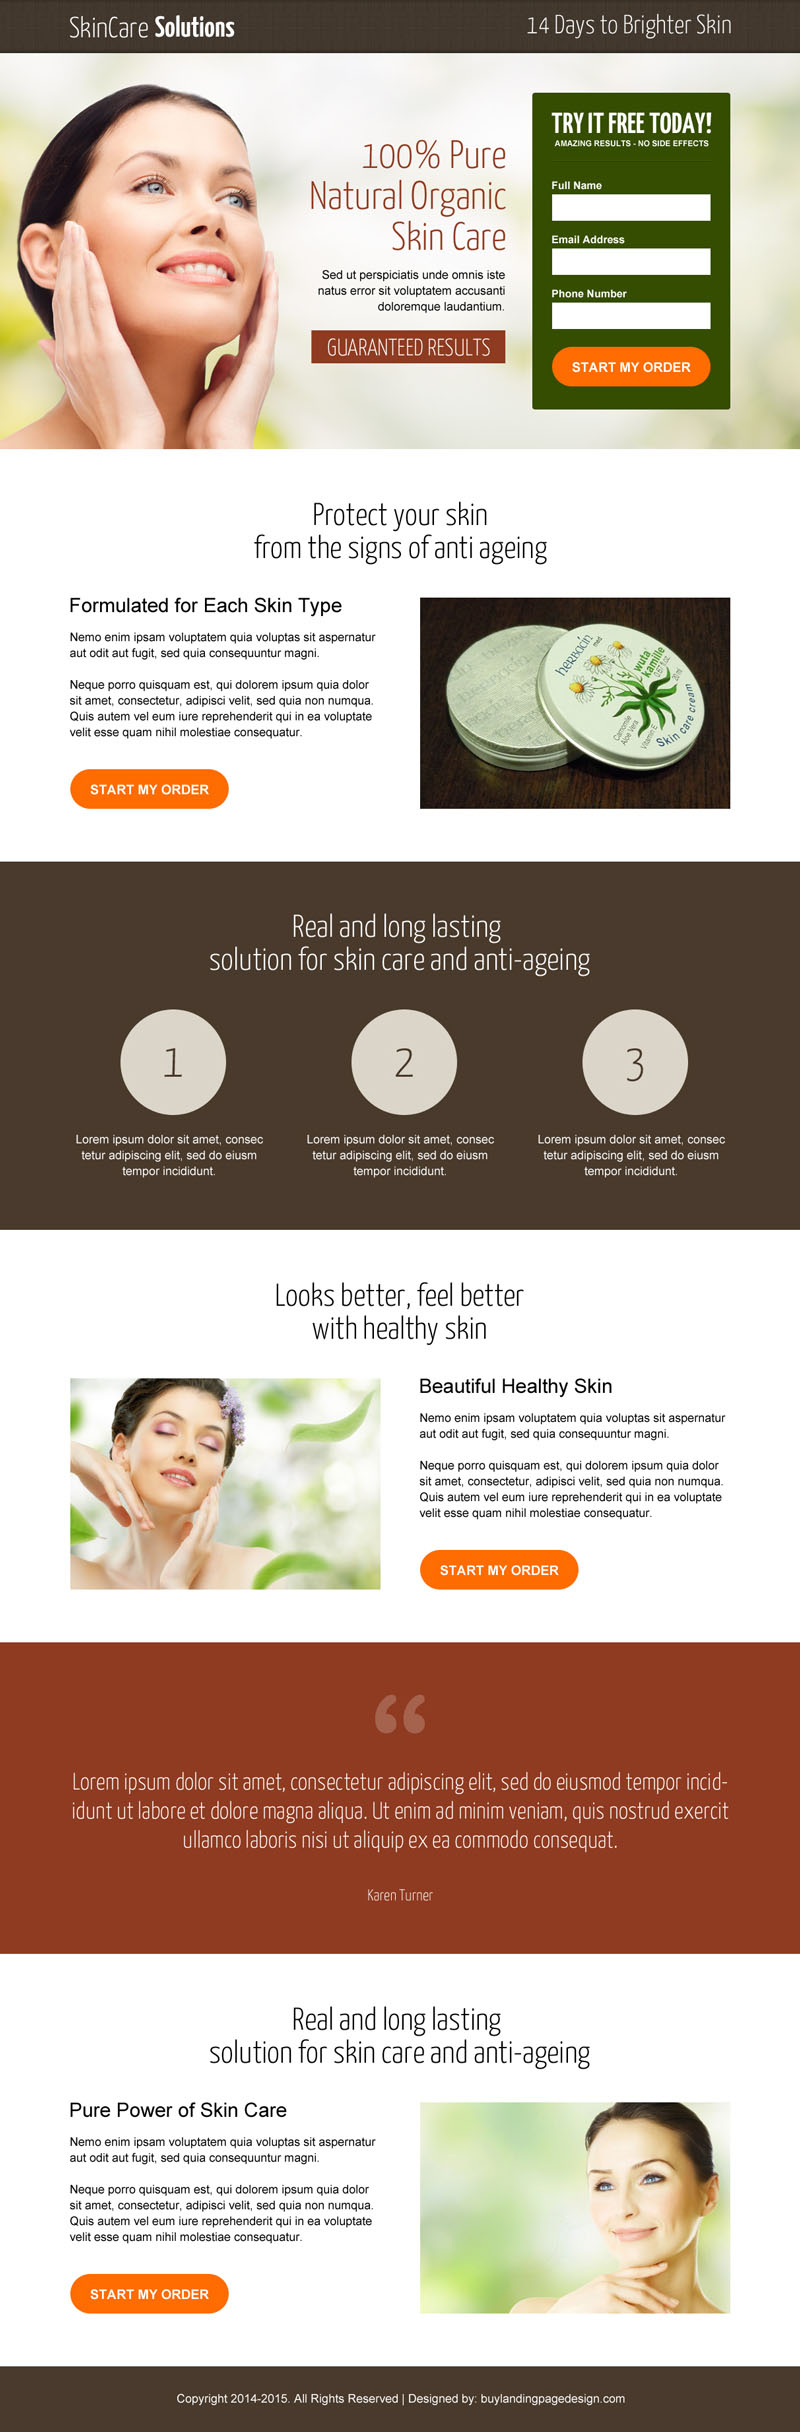 natural-organic-skin-care-product-selling-lead-generation-responsive-landing-page-design-template-003